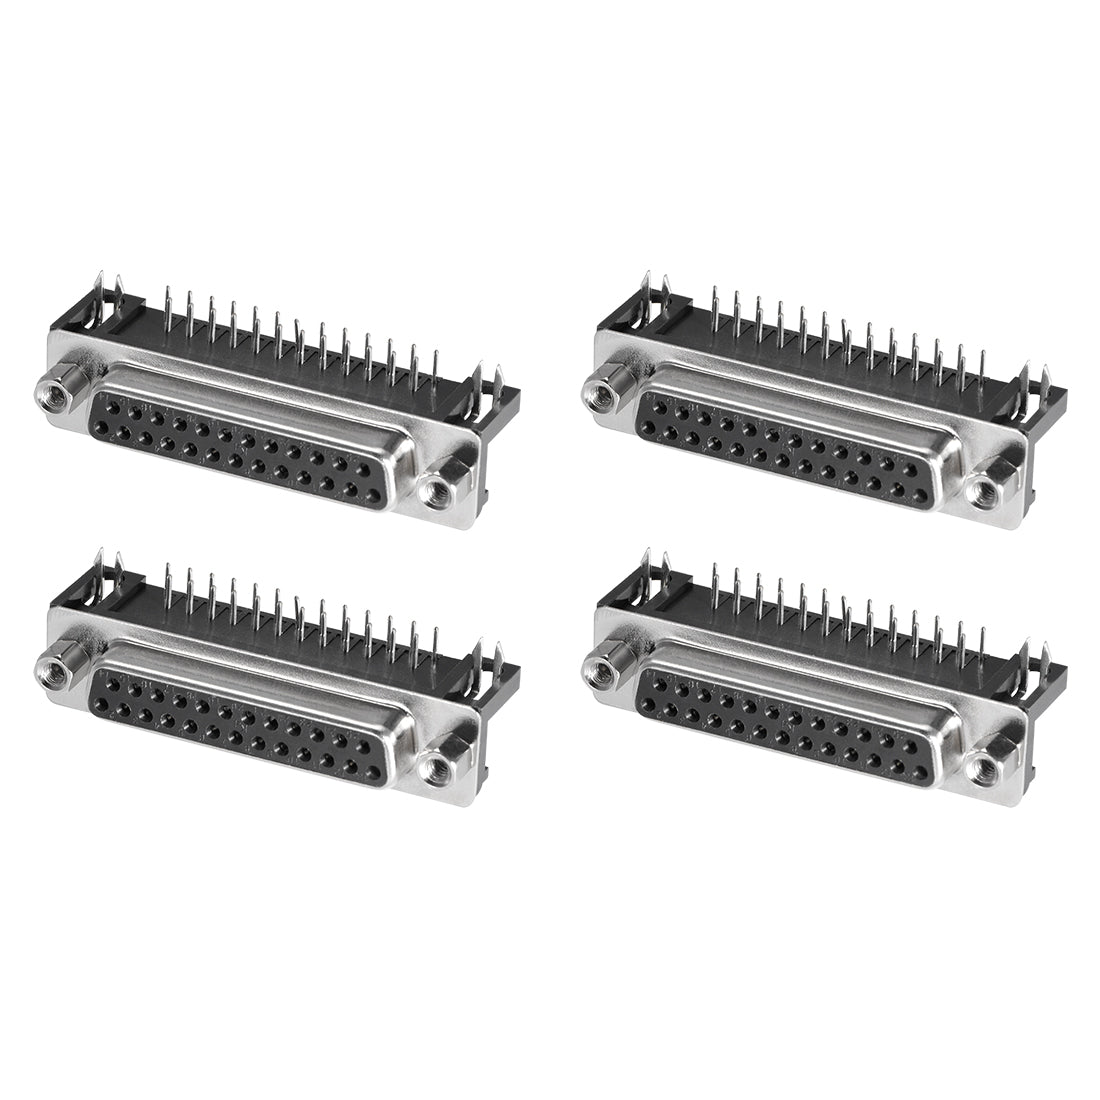 uxcell Uxcell D-sub Connector Female Socket 25-pin 2-row Right Angle Port Terminal Breakout for Mechanical Equipment Black 4pcs